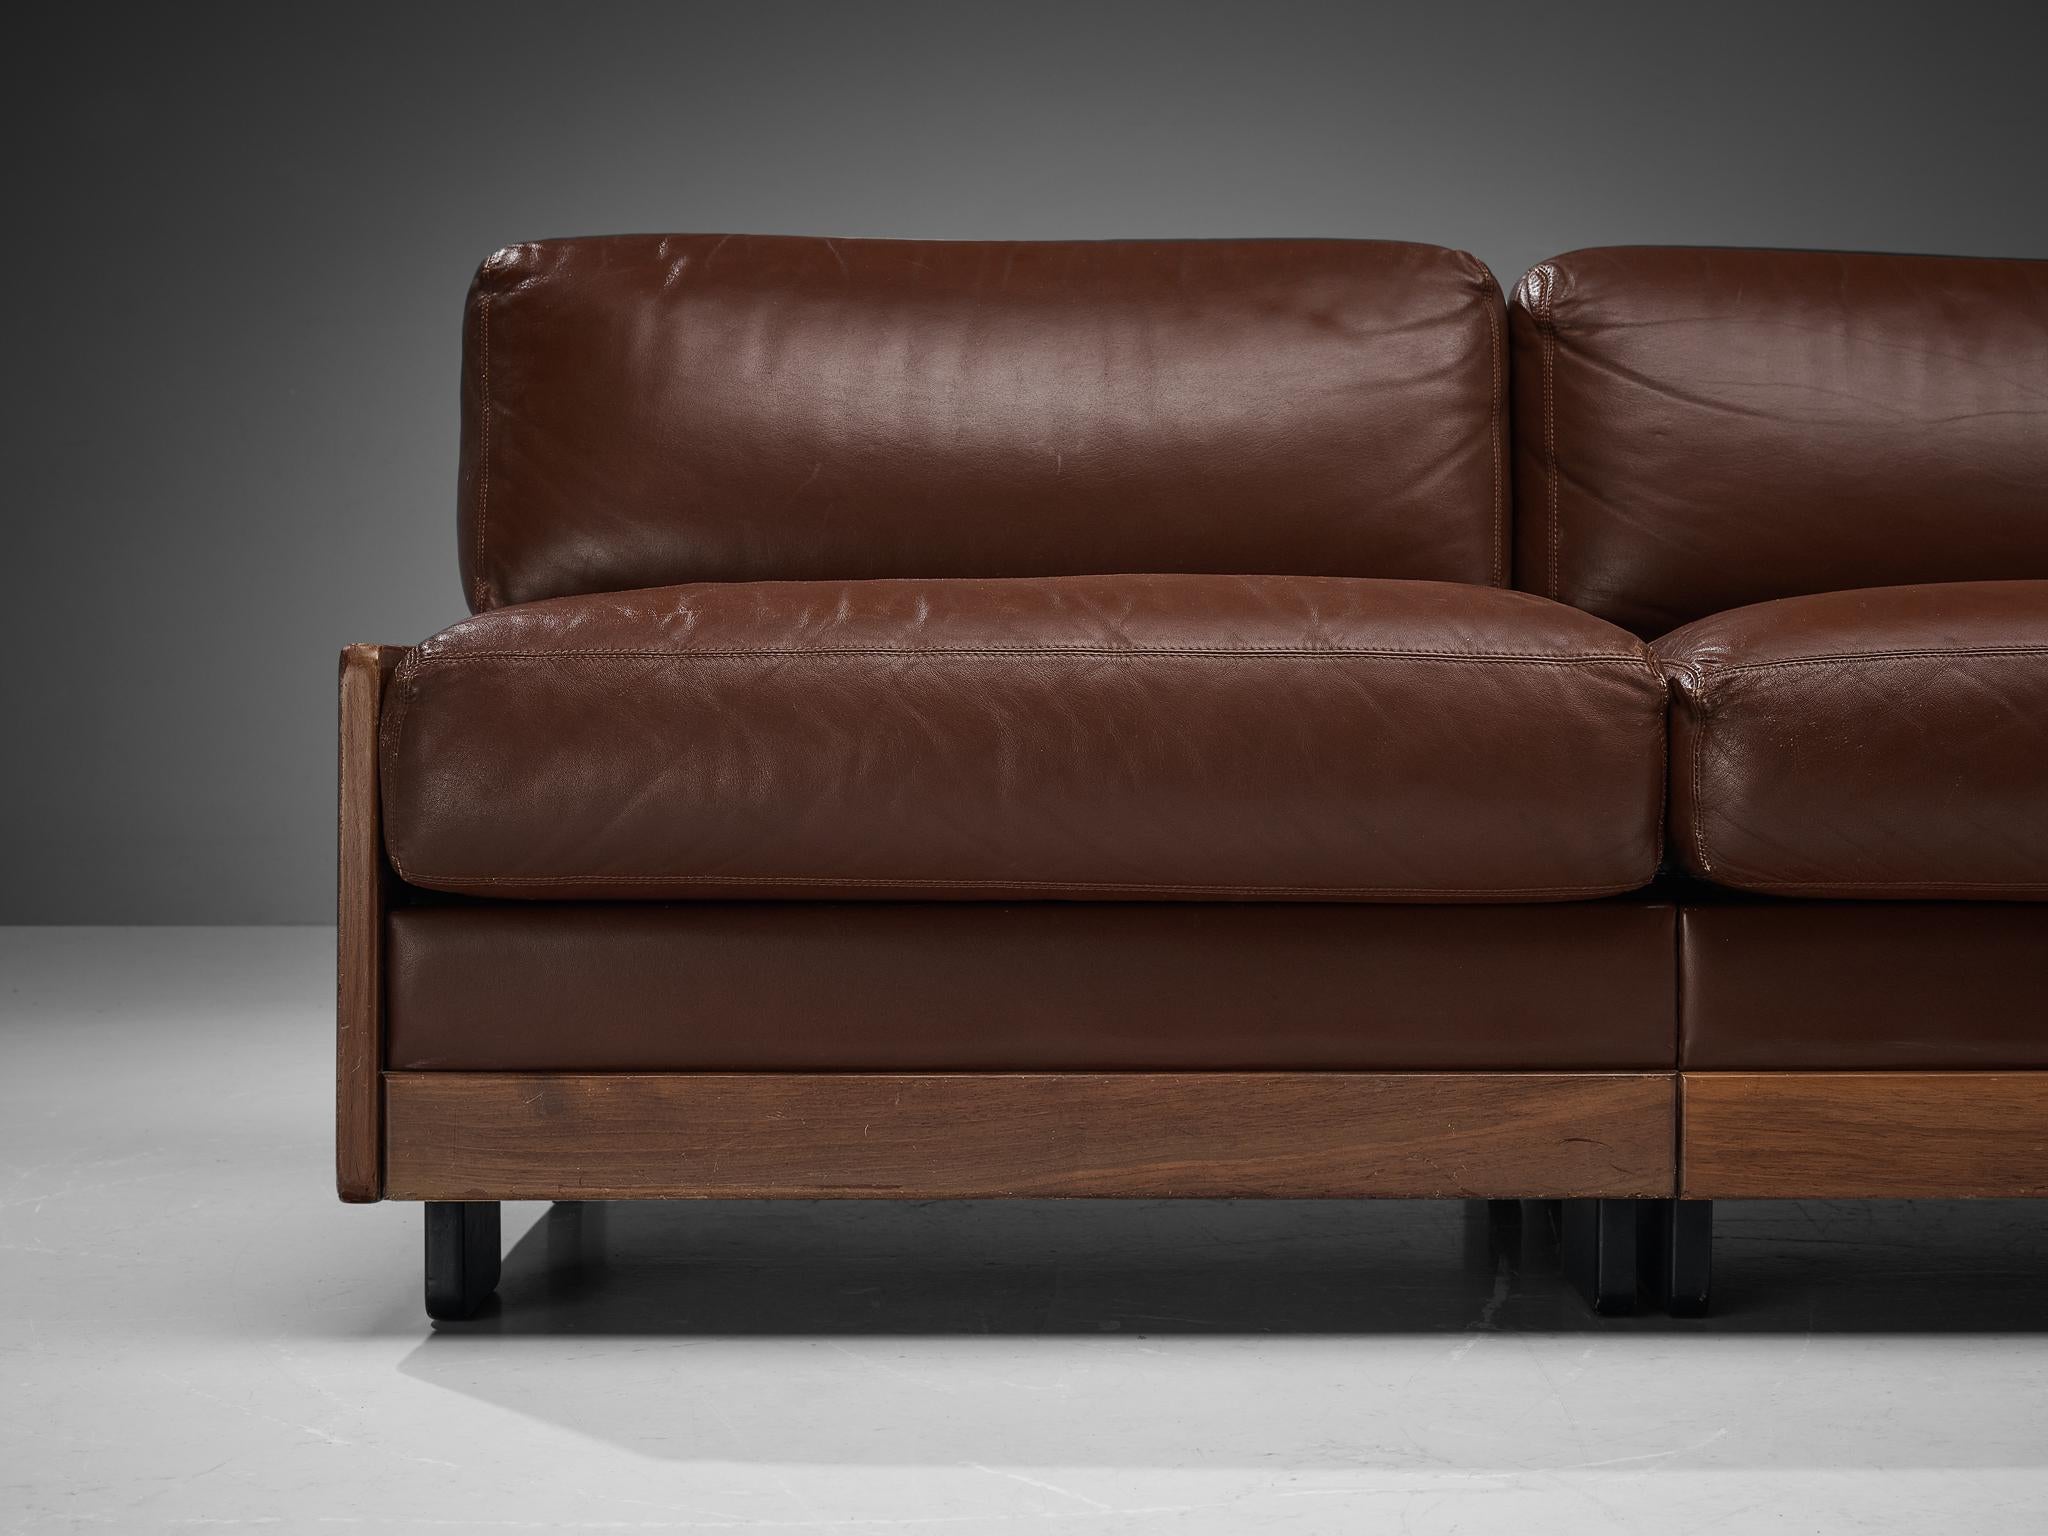 Afra & Tobia Scarpa for Cassina Sofa in Walnut and Brown Leather 1